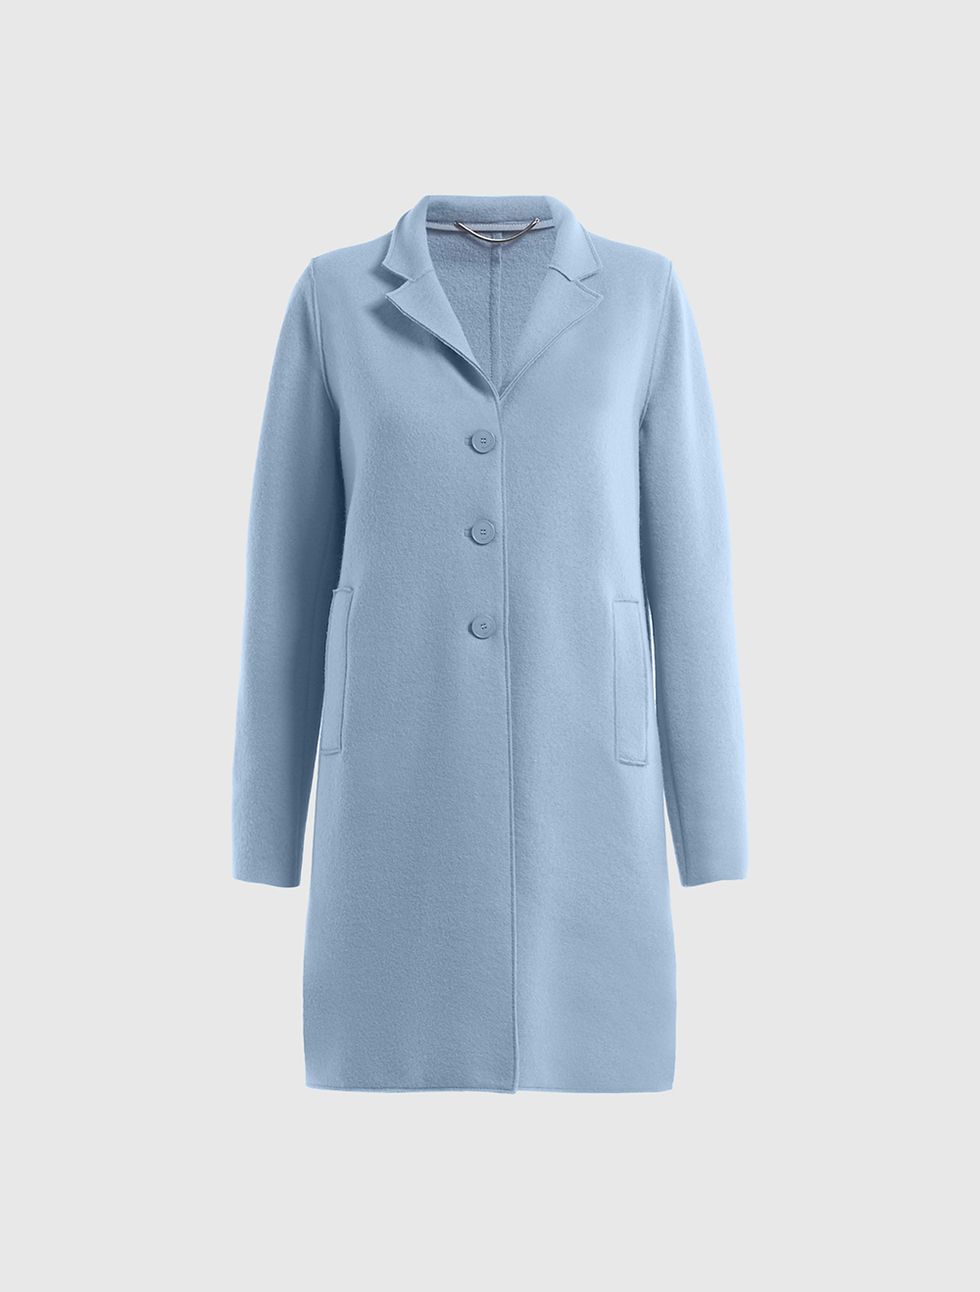 Clothing, Outerwear, Blue, Coat, Collar, Sleeve, Trench coat, Button, Overcoat, Jacket, 